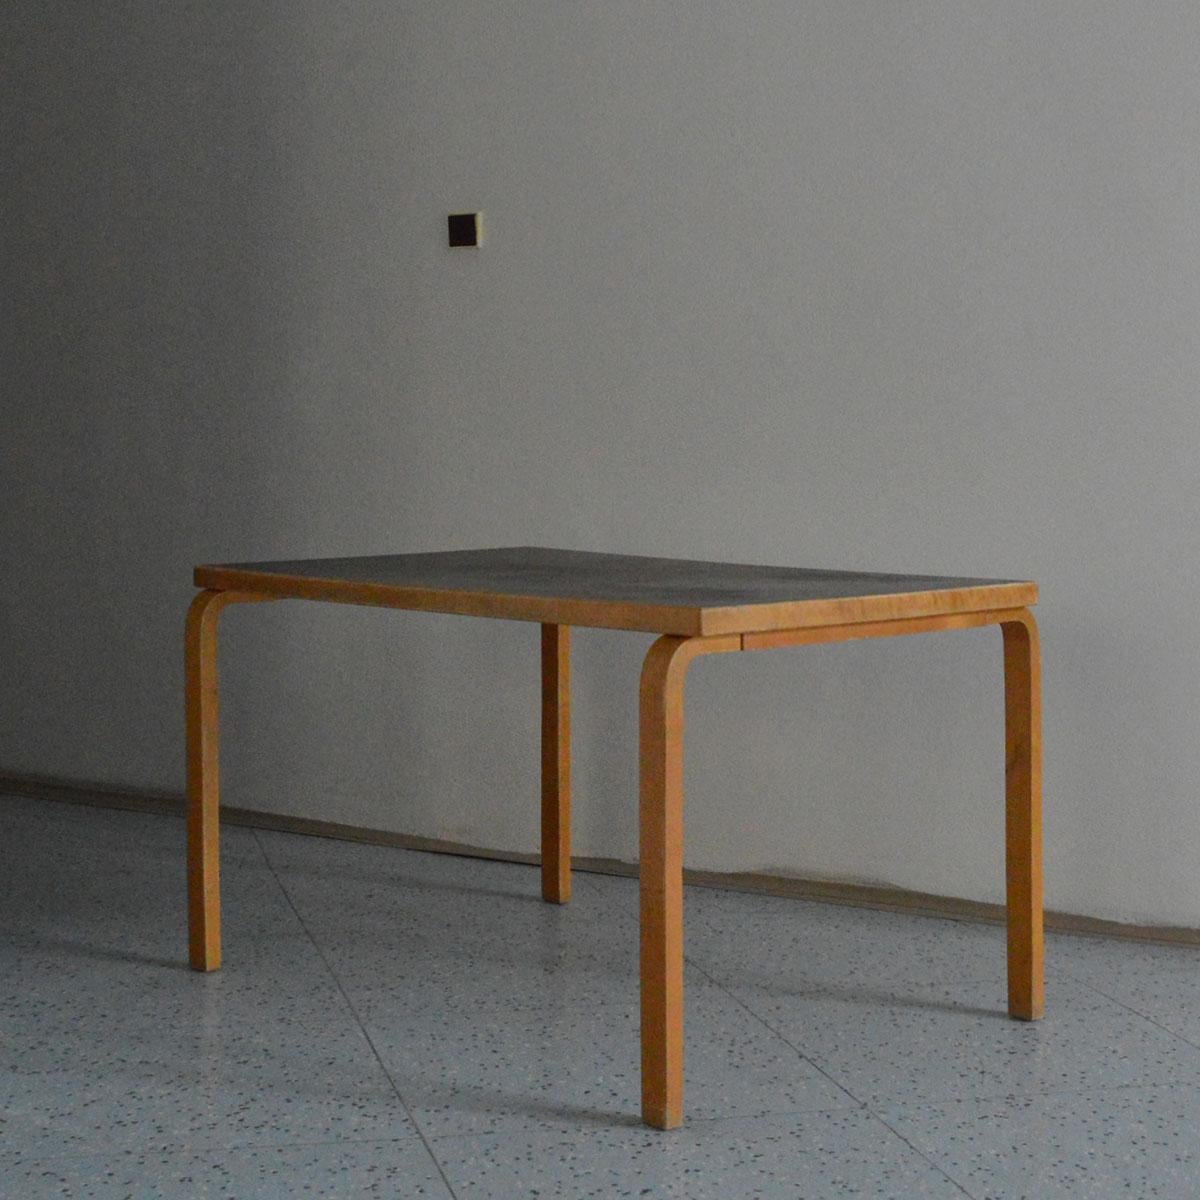 Original and rare dining table in birch, designed by Alvar Aalto for O.Y. Huonekalu-ja Rakennustyötehdas A.B. in Finland, 1950s.

This extraordinary dining table is a timeless and iconic piece of furniture from the 1950s. It was designed by the